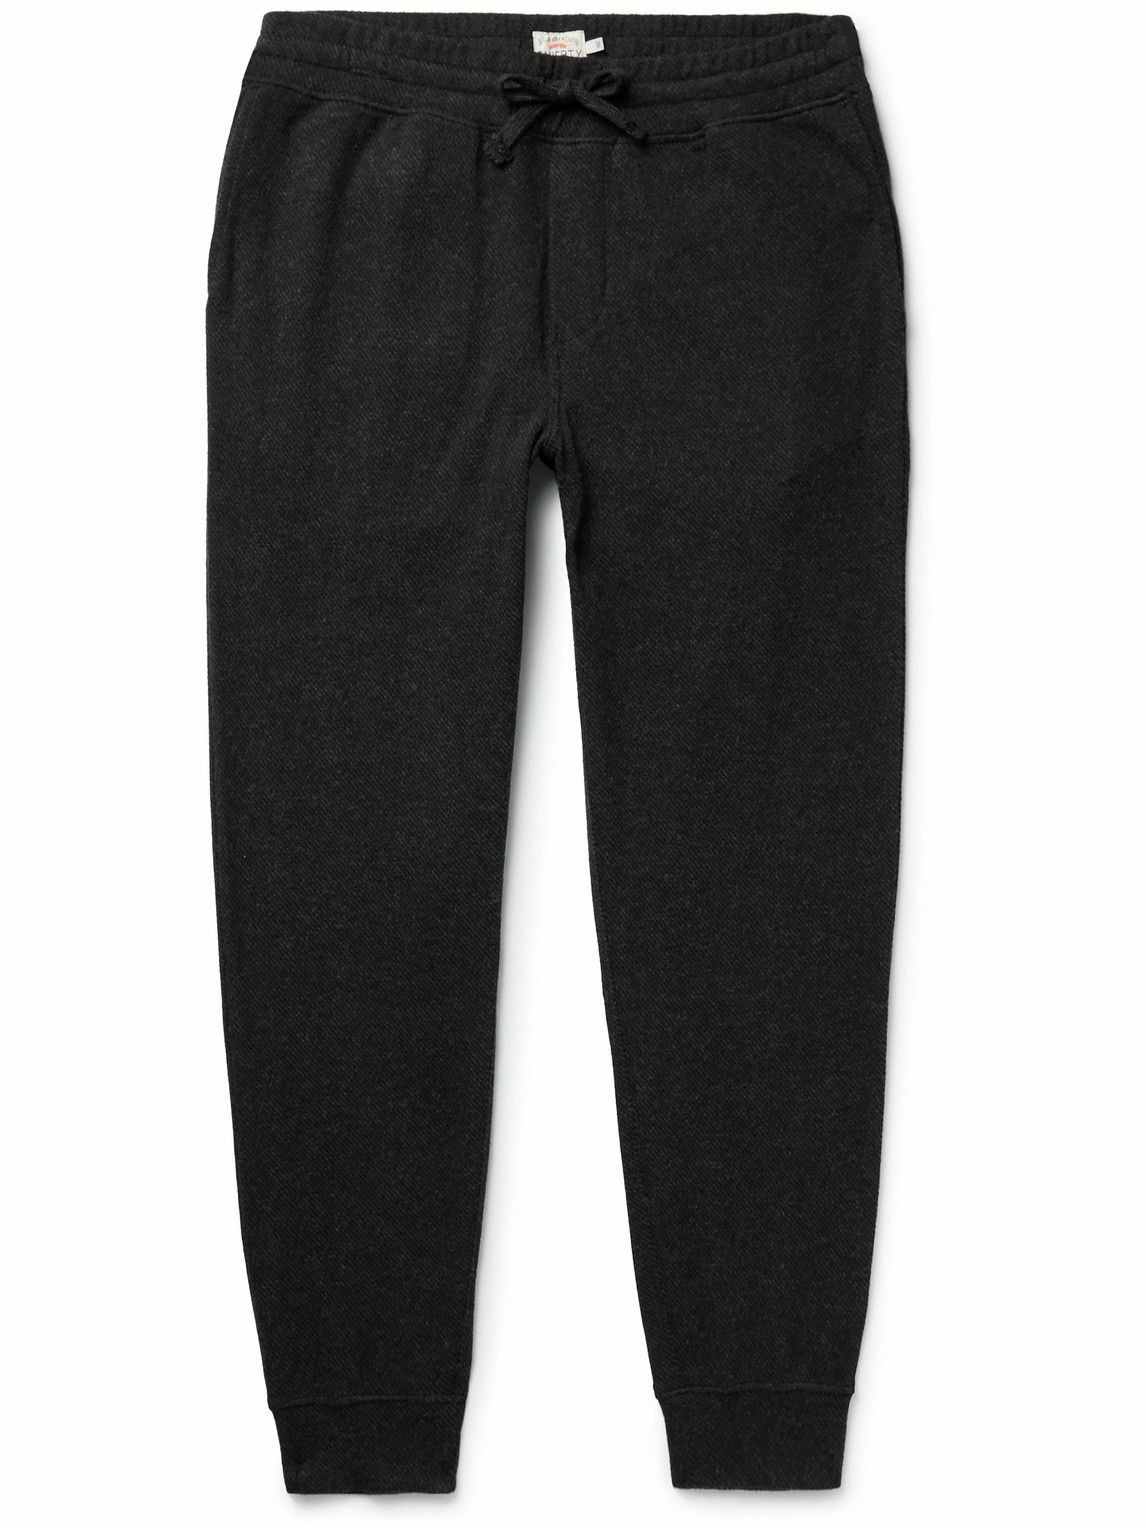 Faherty - Legend Tapered Twill Sweatpants - Black Faherty